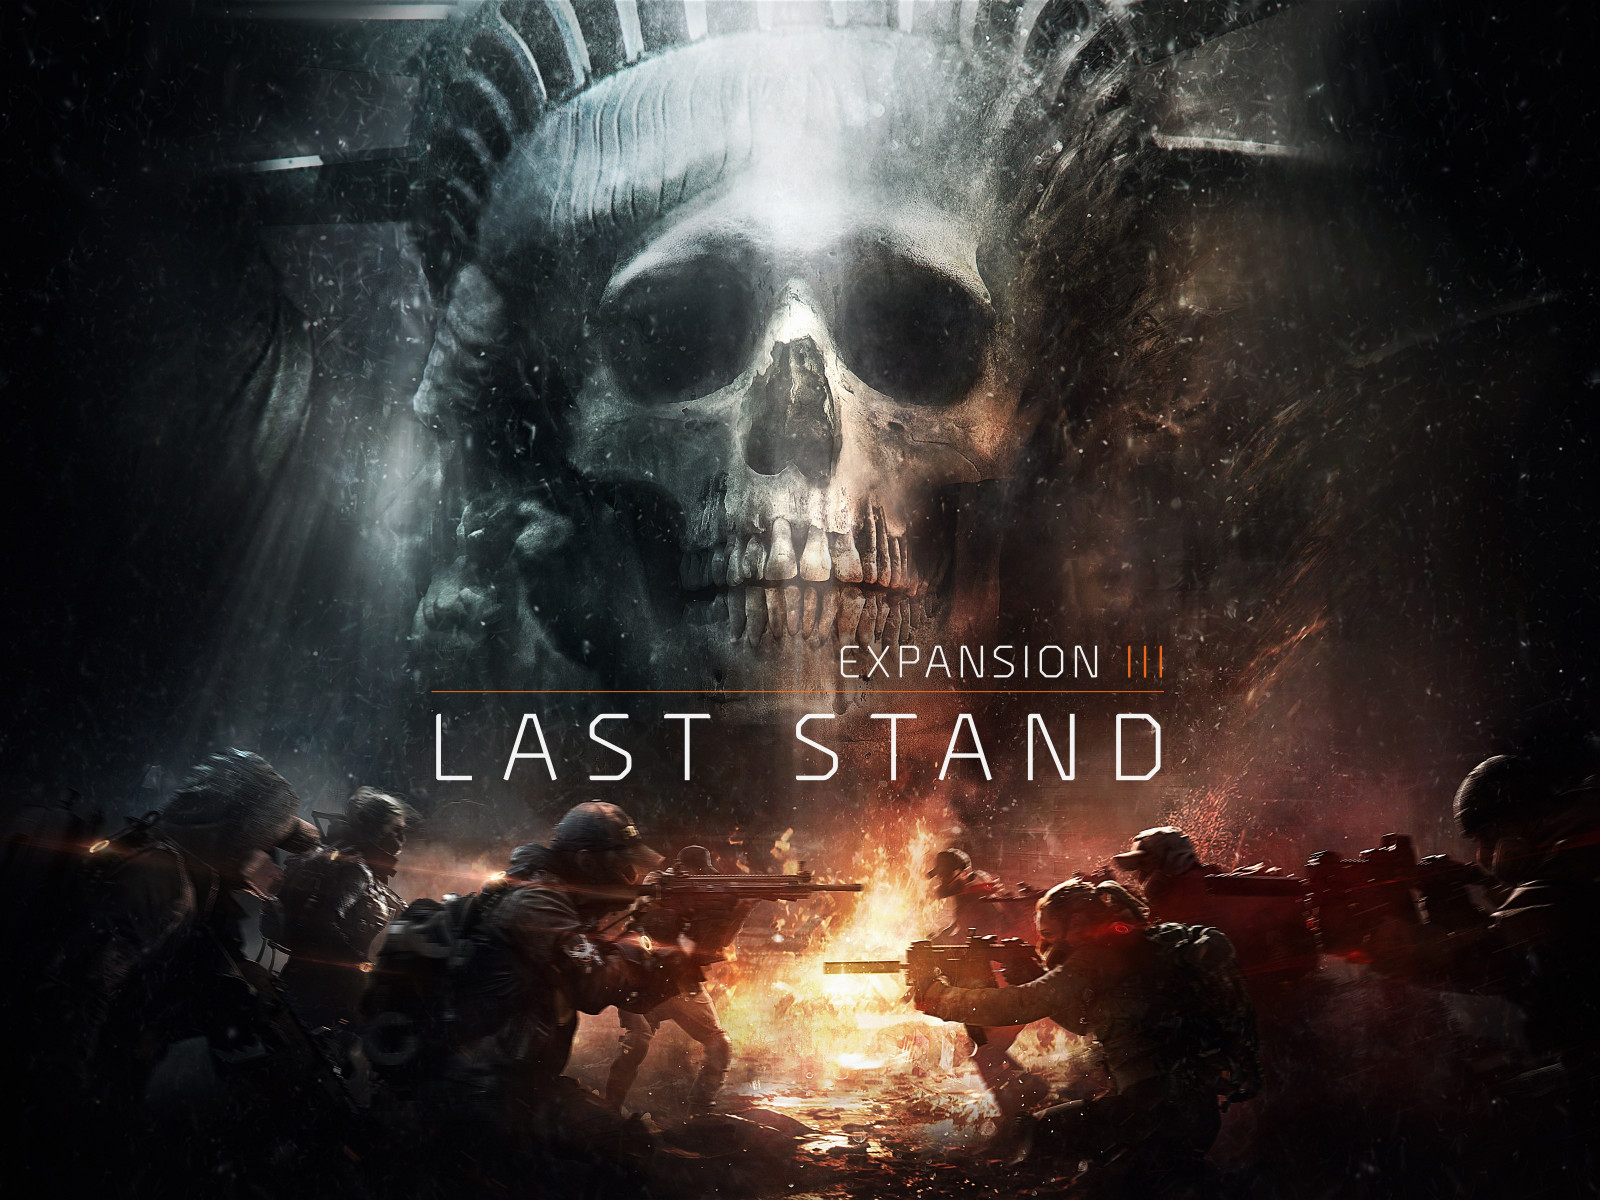 The Division Last Stand Expansion 3 wallpaper 1600x1200